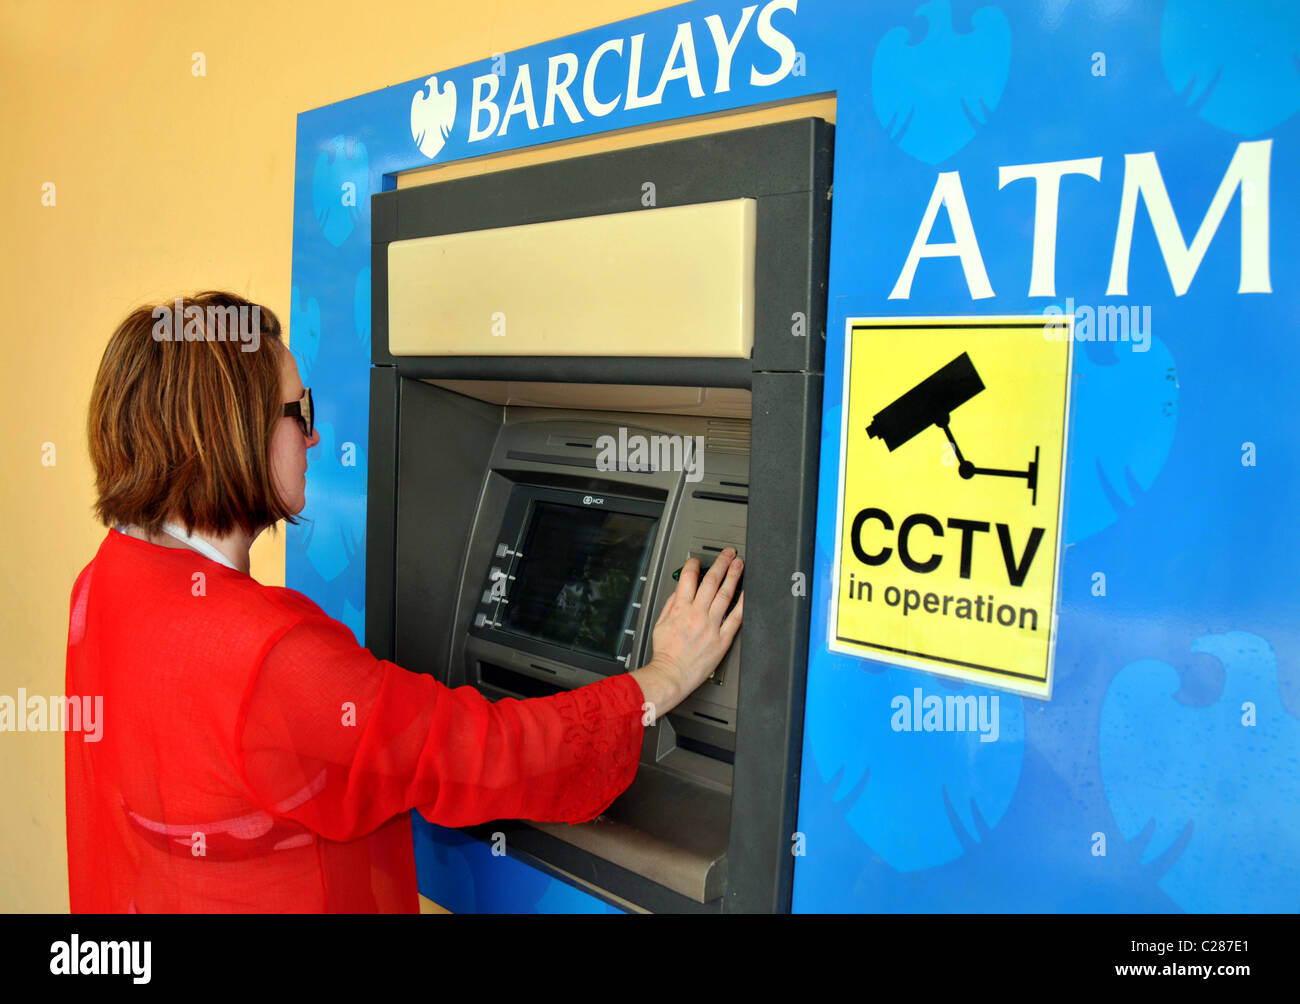 Barclays Bank branch and ATM. Woman using cashpoint. Stock Photo